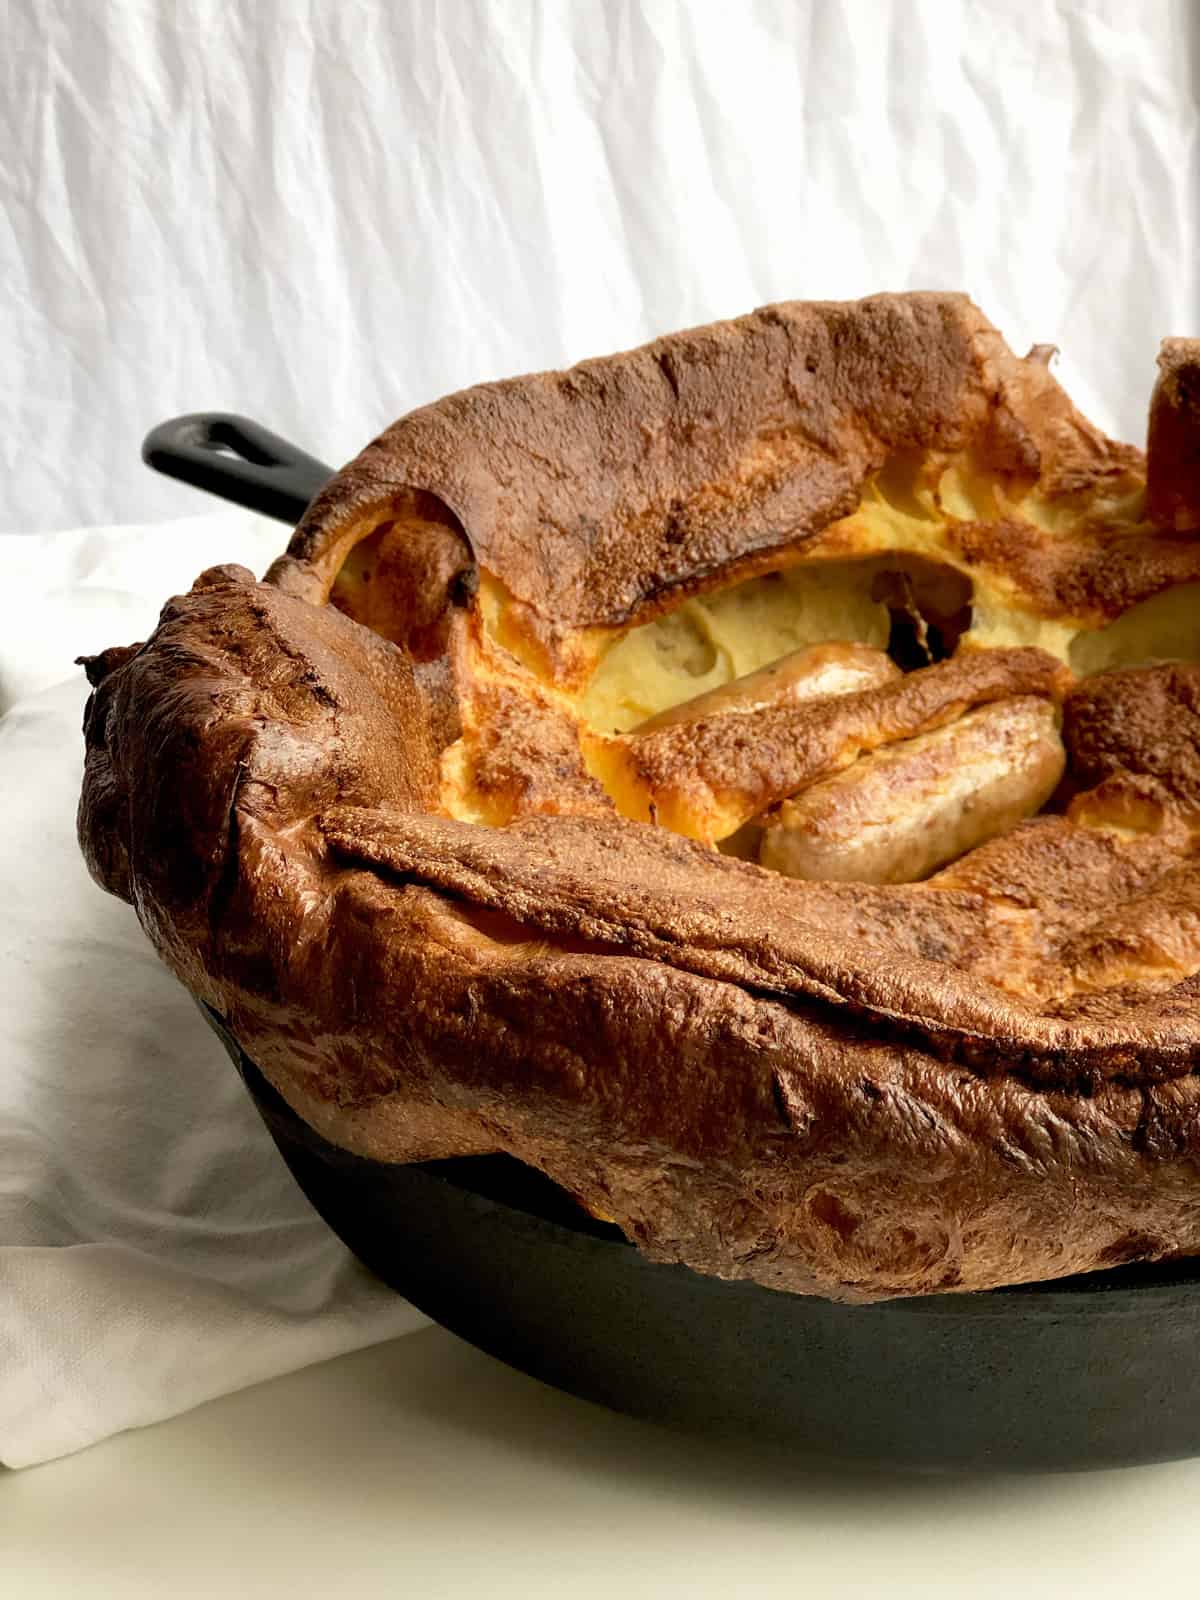 James Martin's Toad in the hole